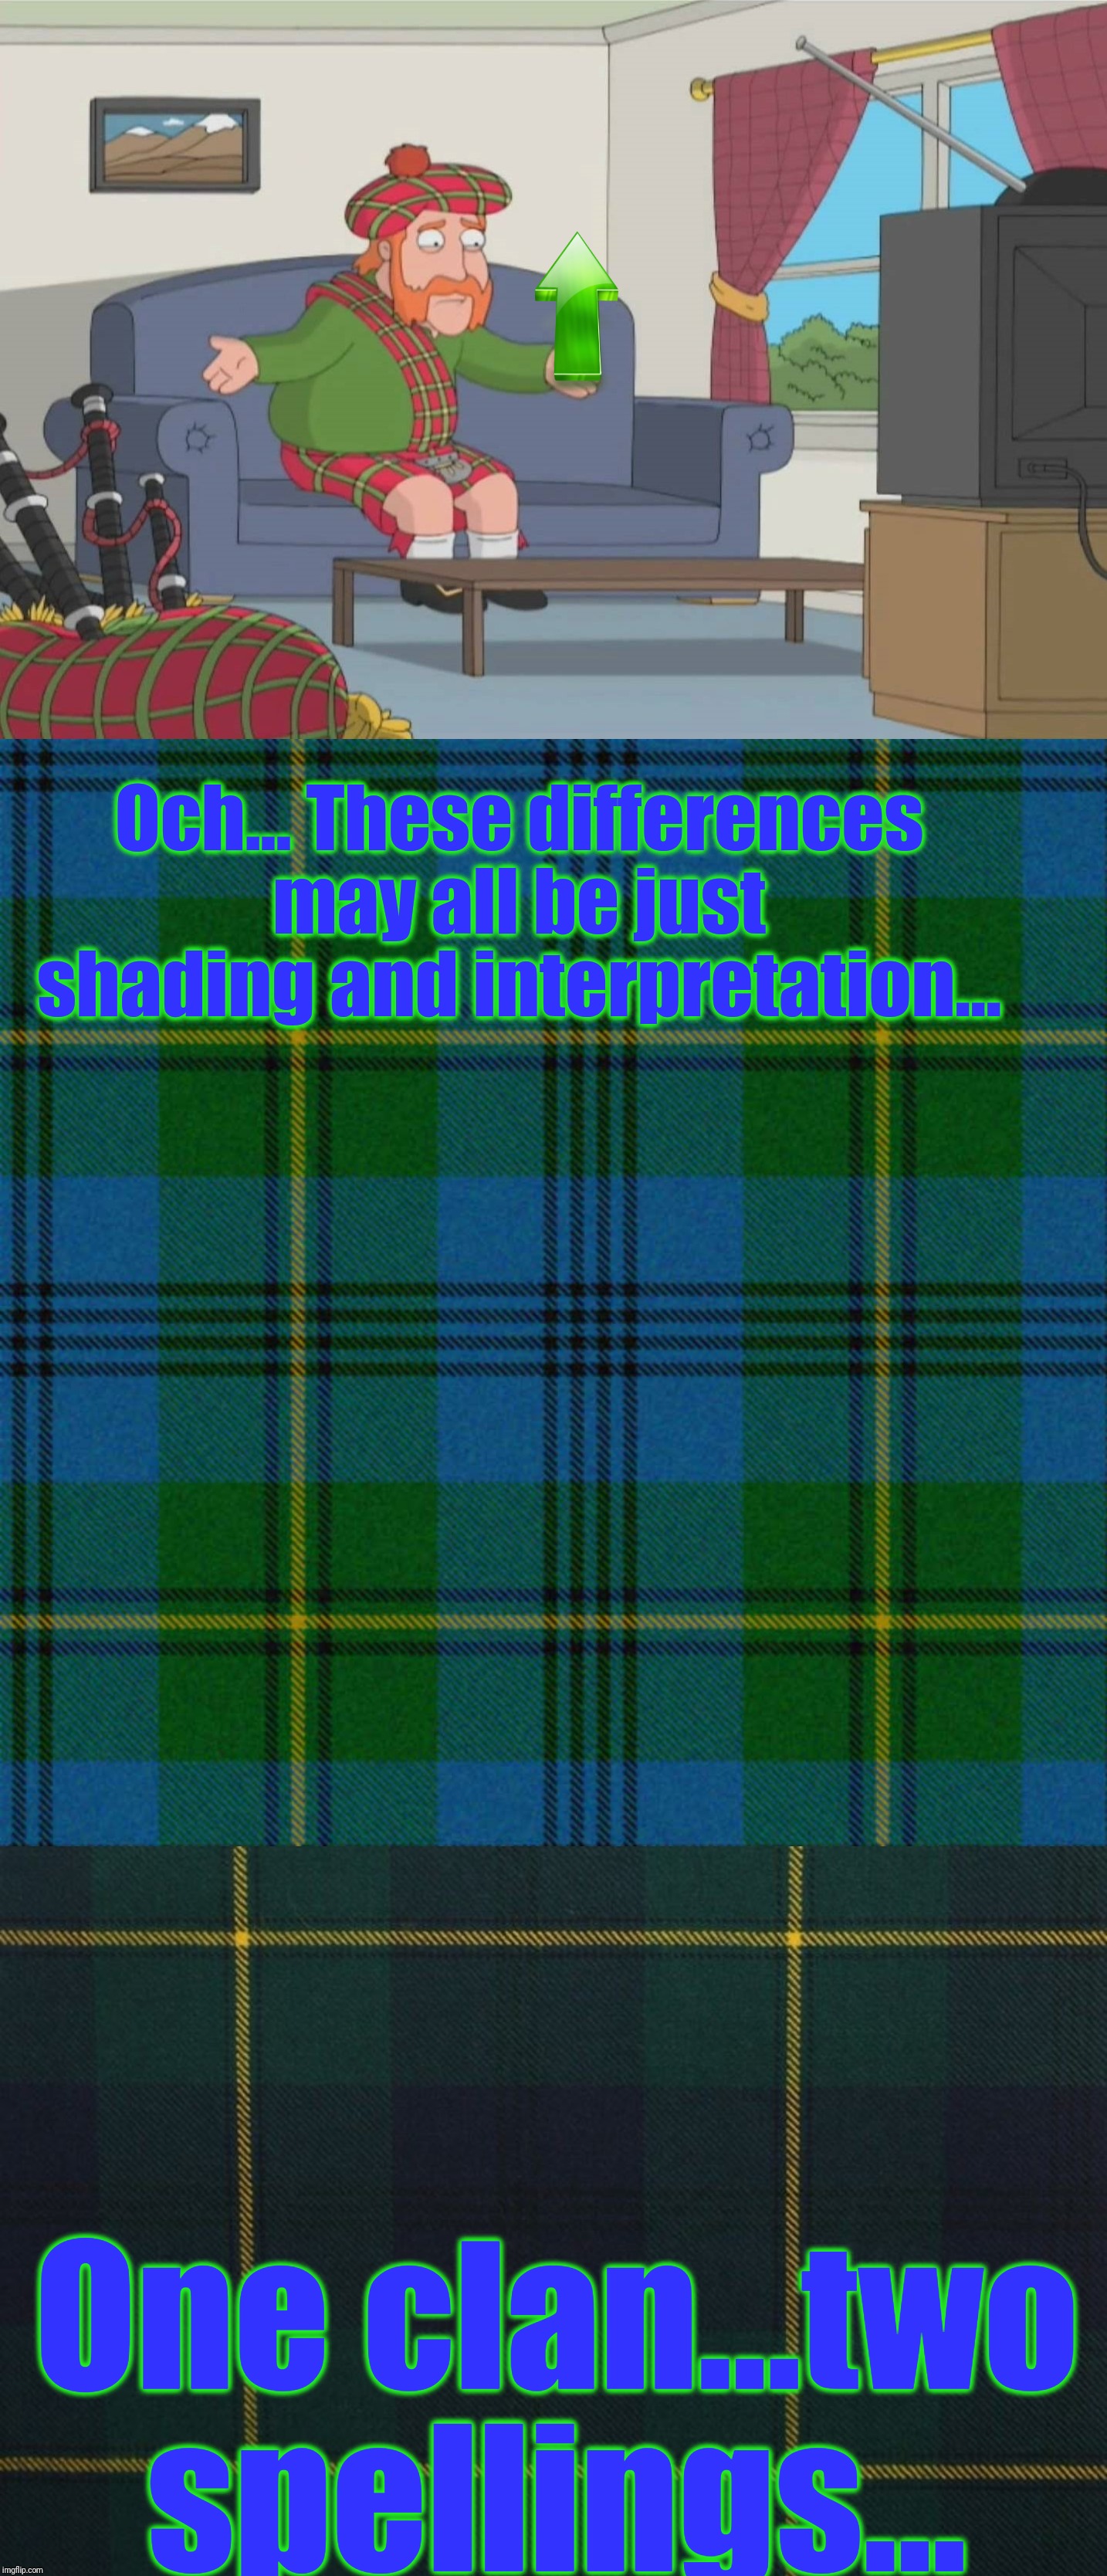 Och... These differences may all be just shading and interpretation... One clan...two spellings... | image tagged in scotsman yelling not using your brain | made w/ Imgflip meme maker